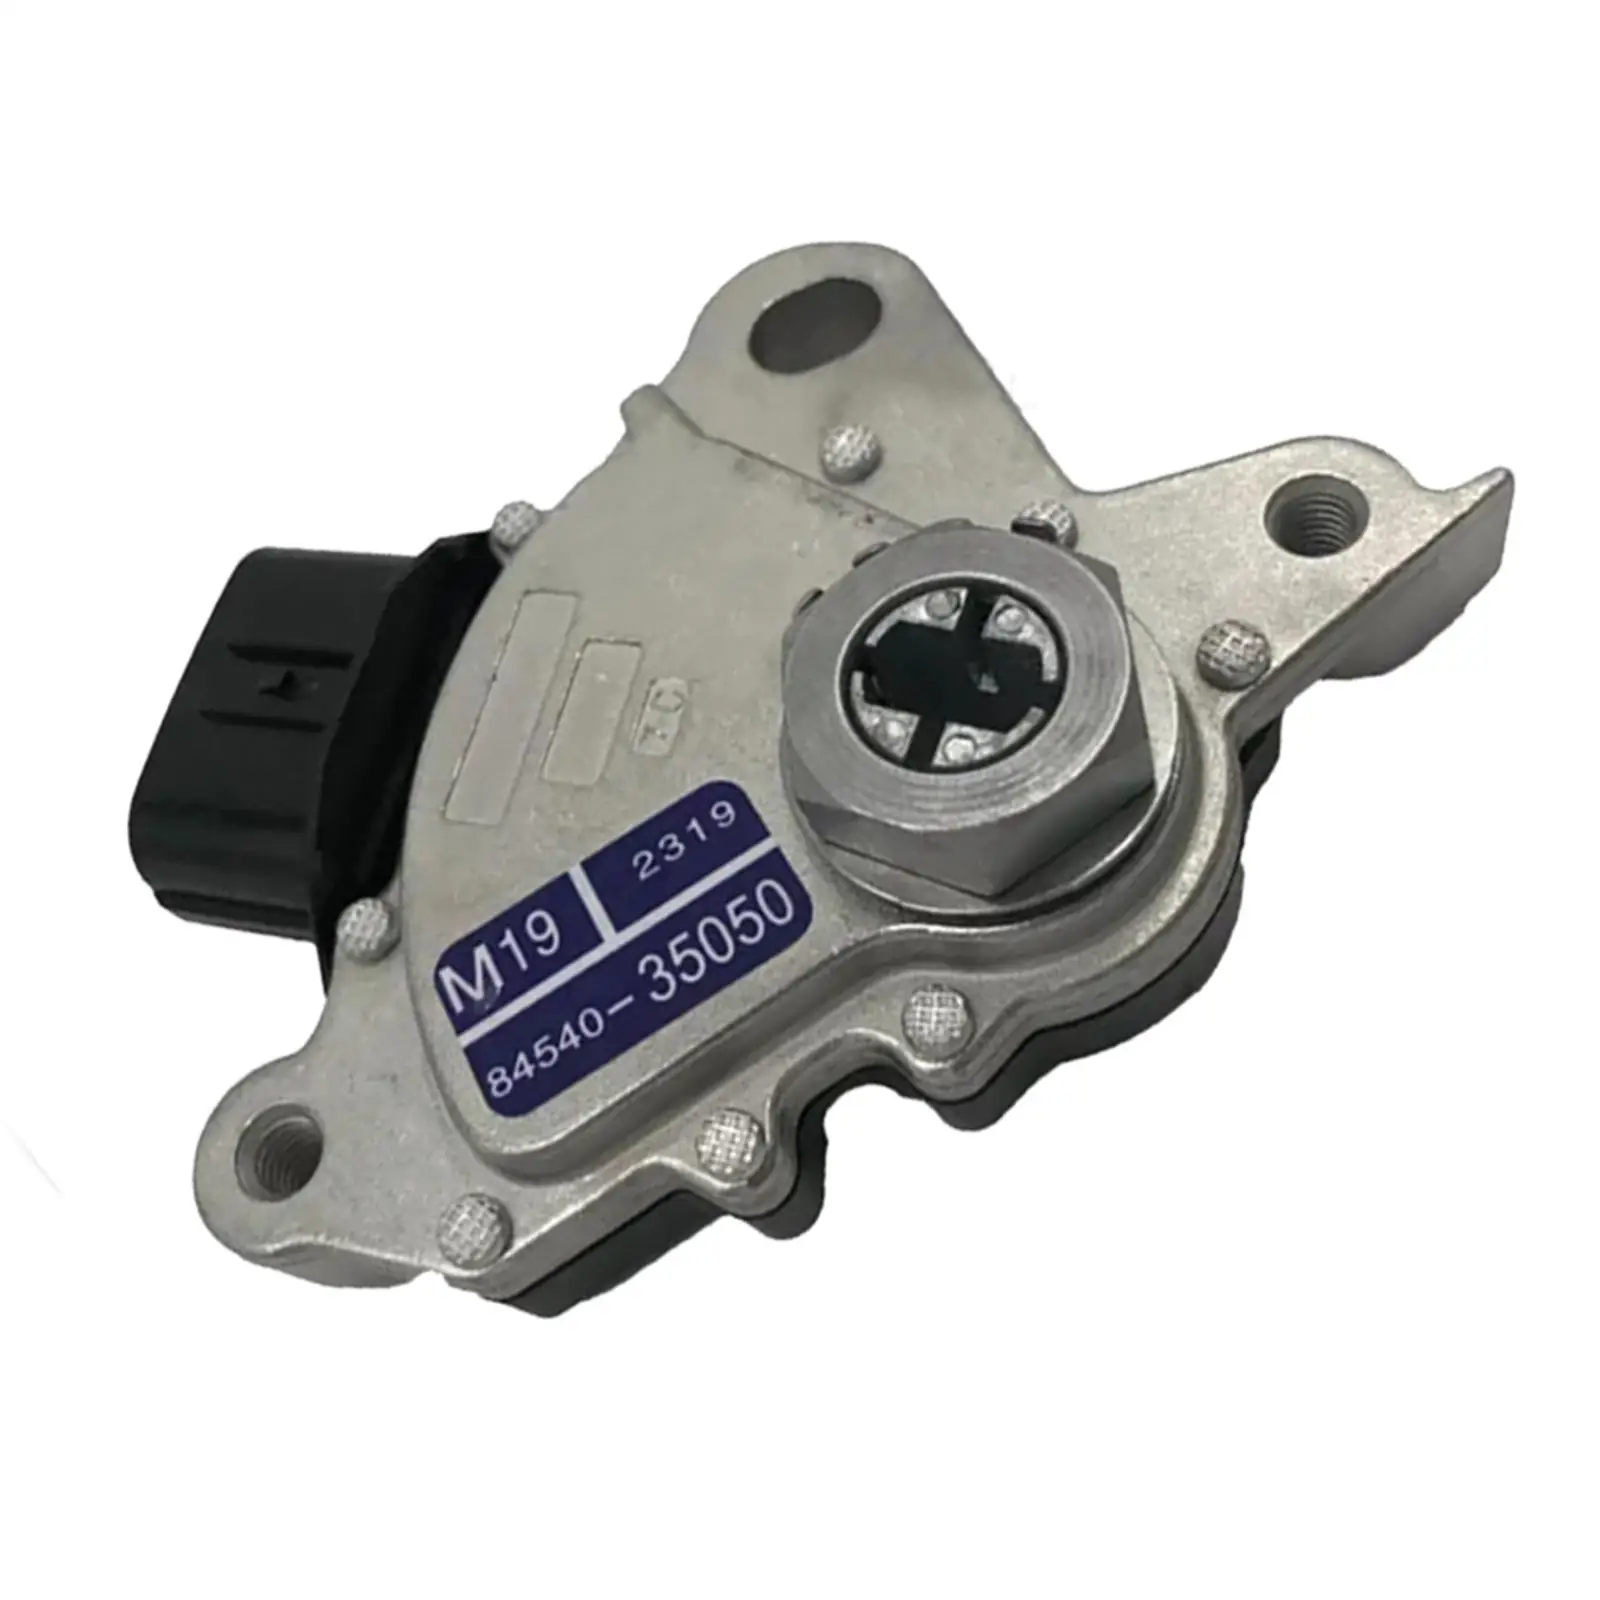 SW4984 Neutral Start Switch for Toyota Tacoma Replaces Spare Parts